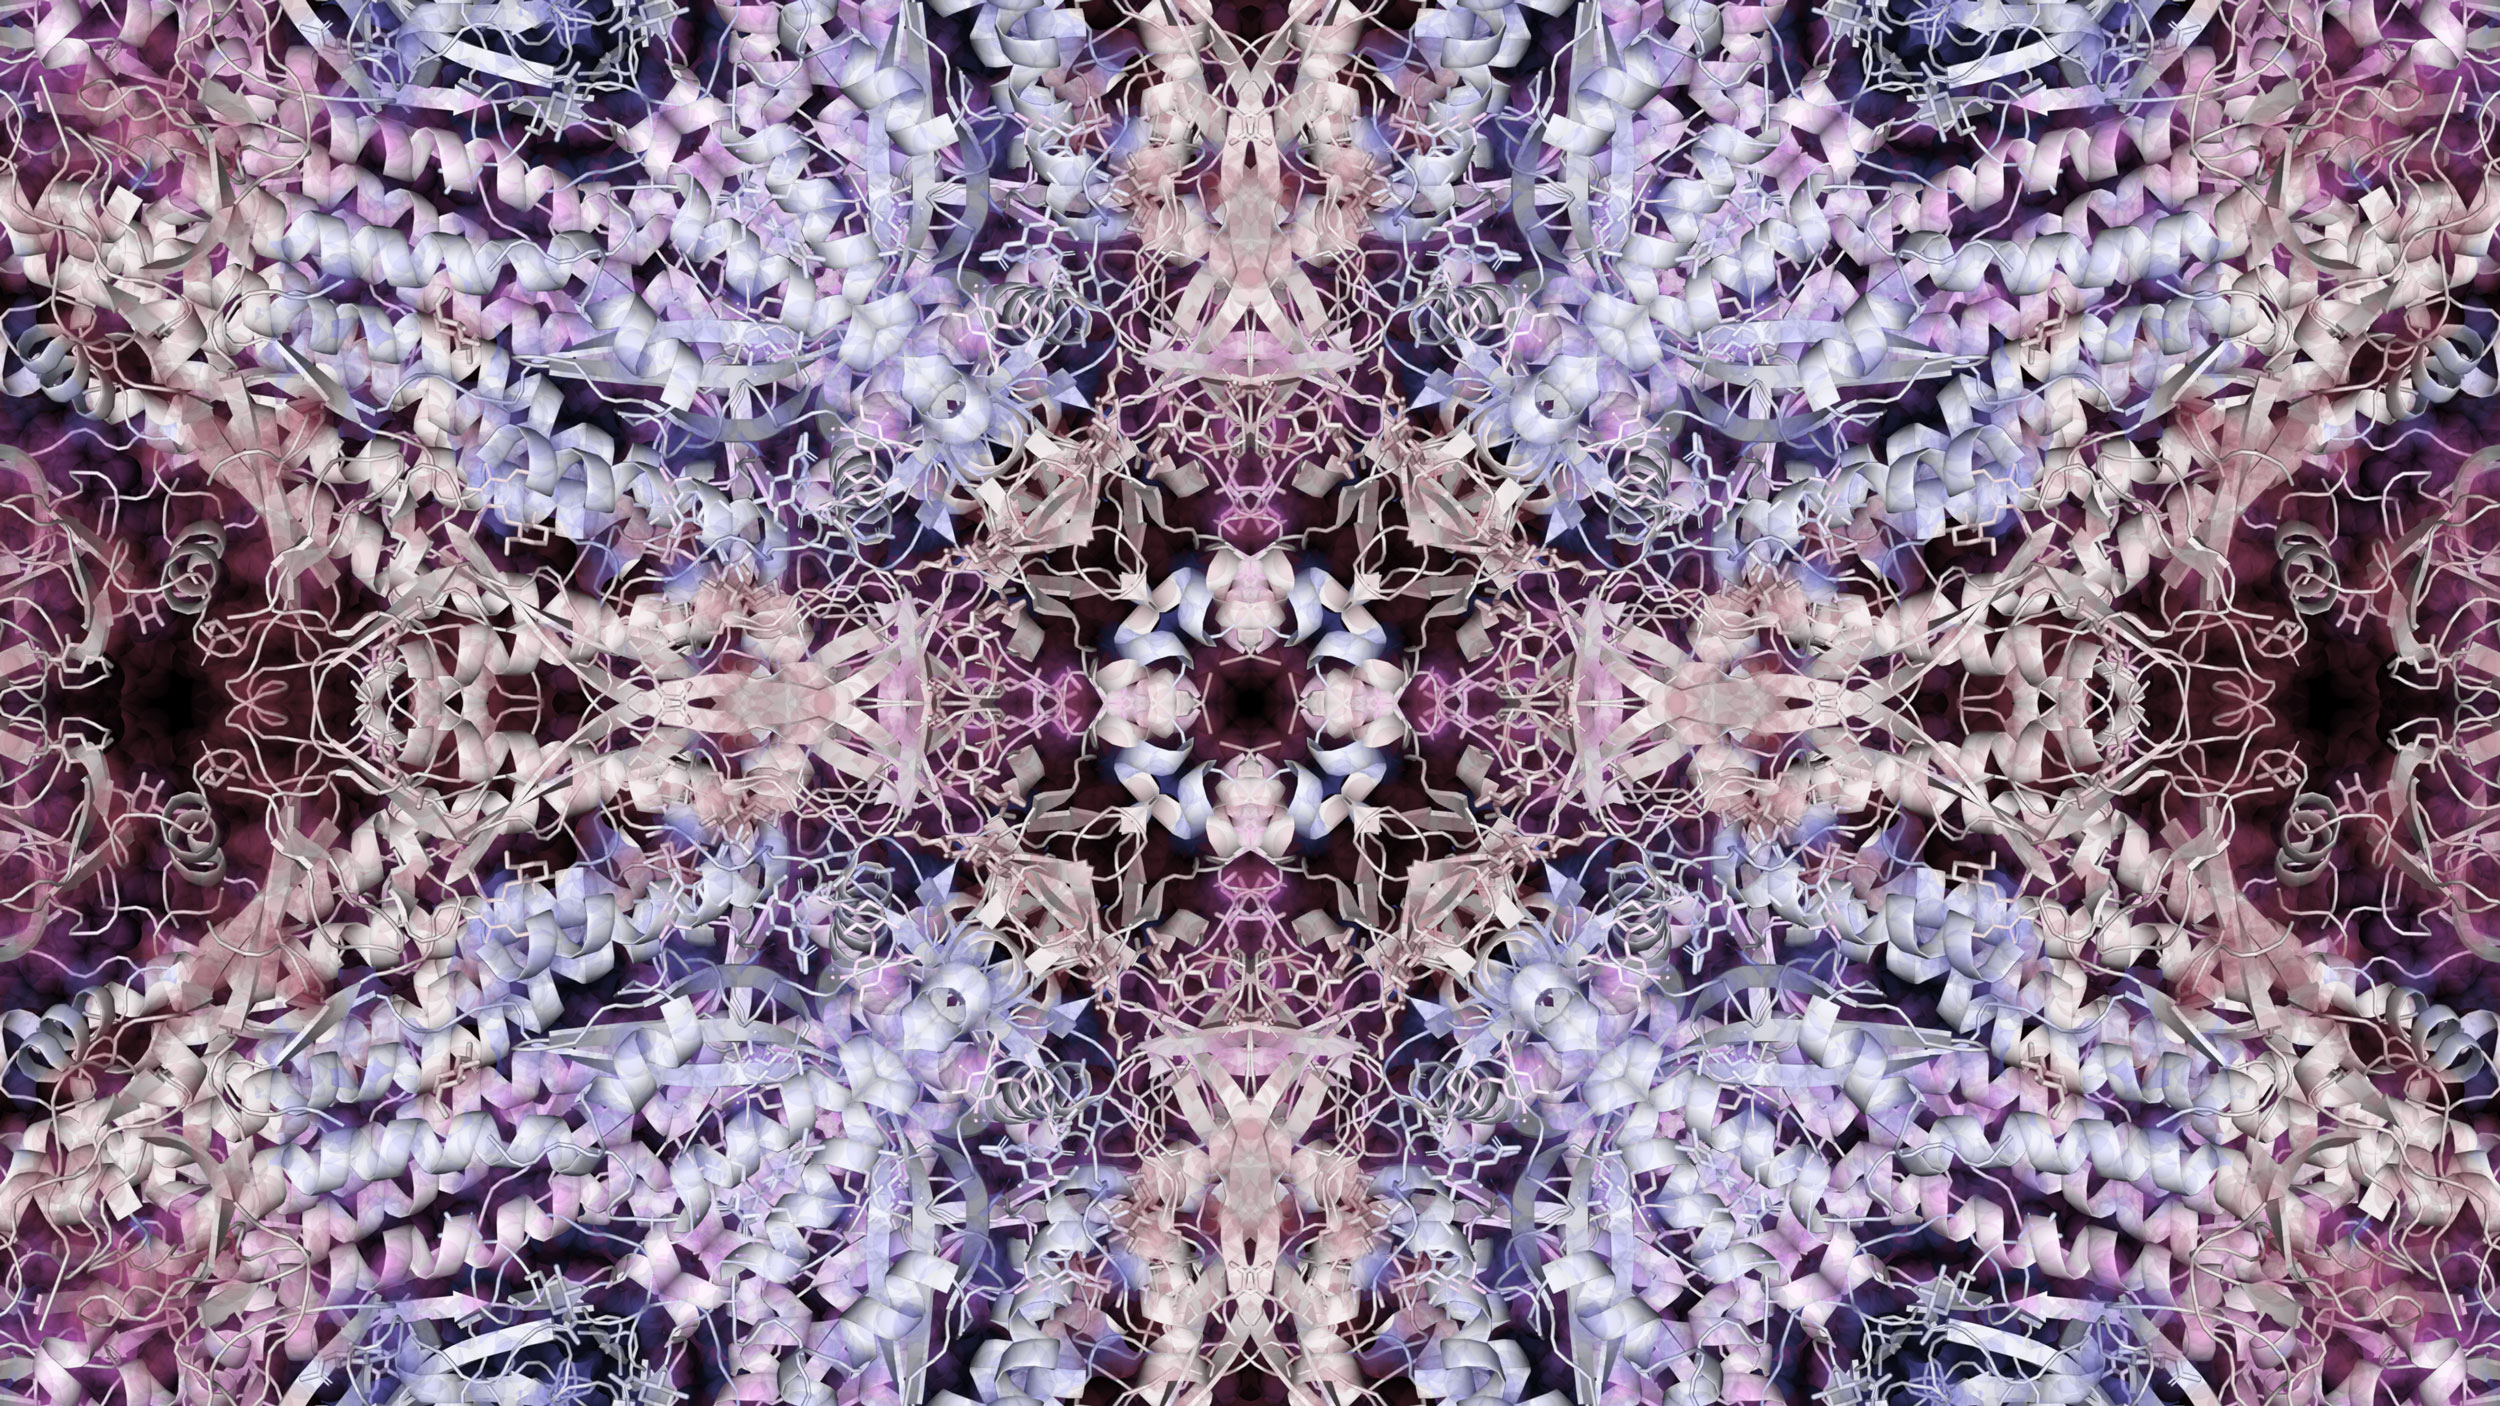 A kaleidoscope-like image with hues of purple and deep red is created using molecular modeling to combine science and art.